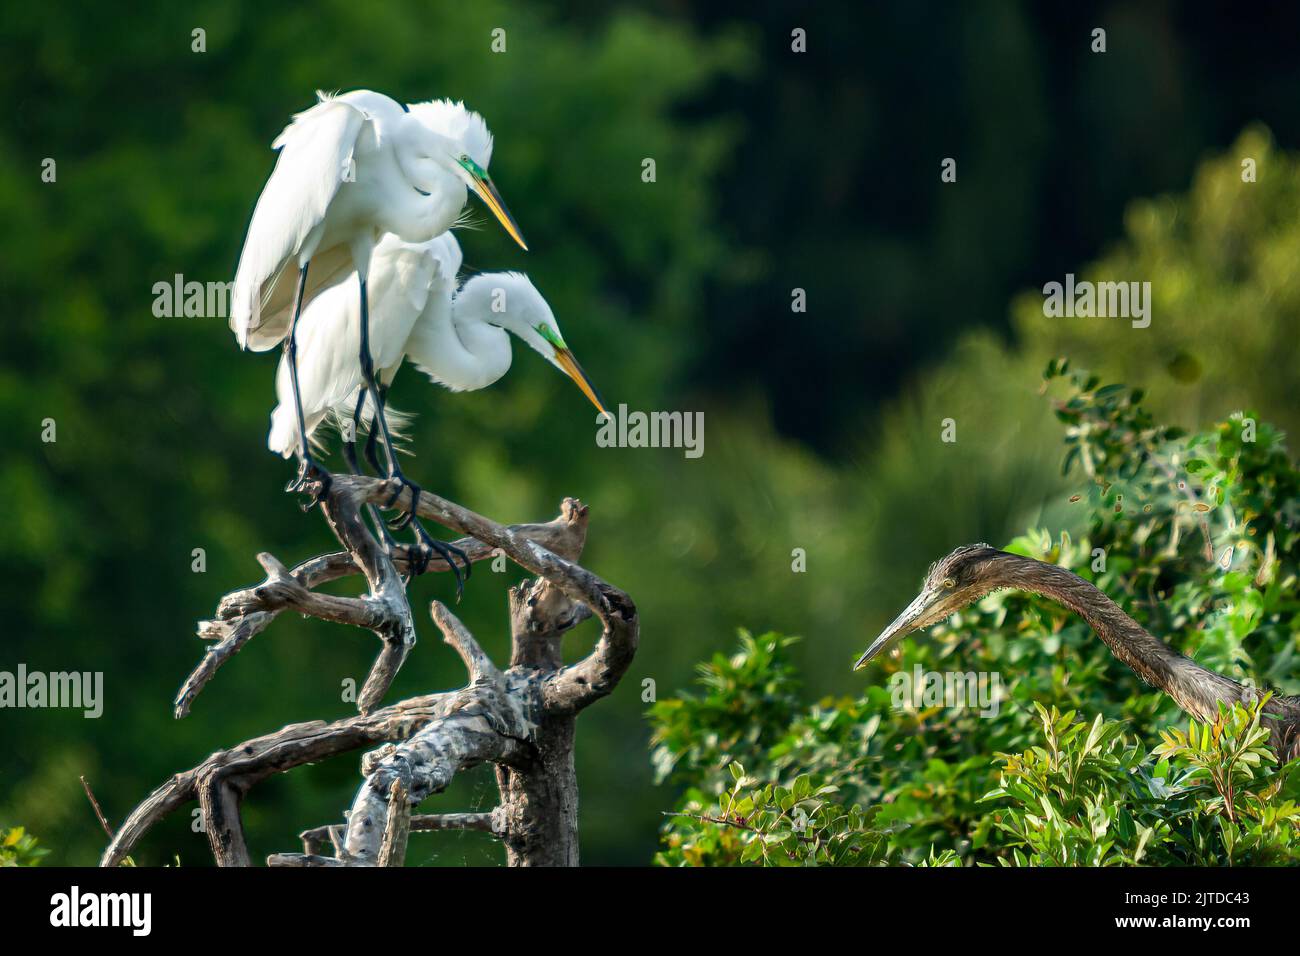 An American Egret in breeding plumage at the Audubon Rookery in Venice, Florida, USA. Stock Photo